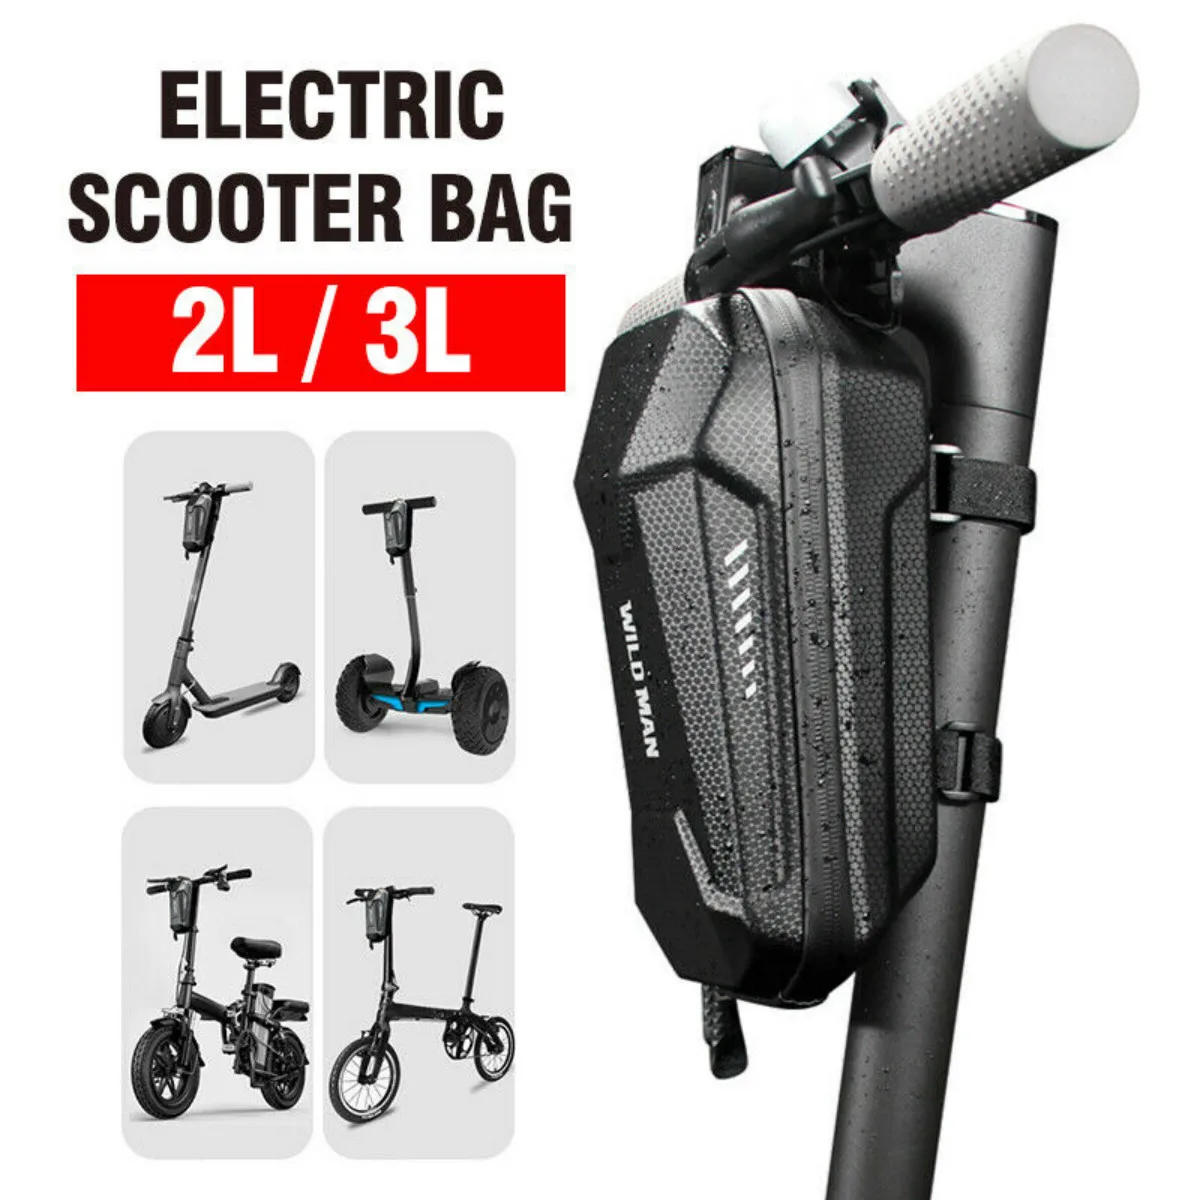 Wheel Up EVA Hard Shell Electric Scooter Bag for Xiaomi M365 Ninebot ES1/2/3/4